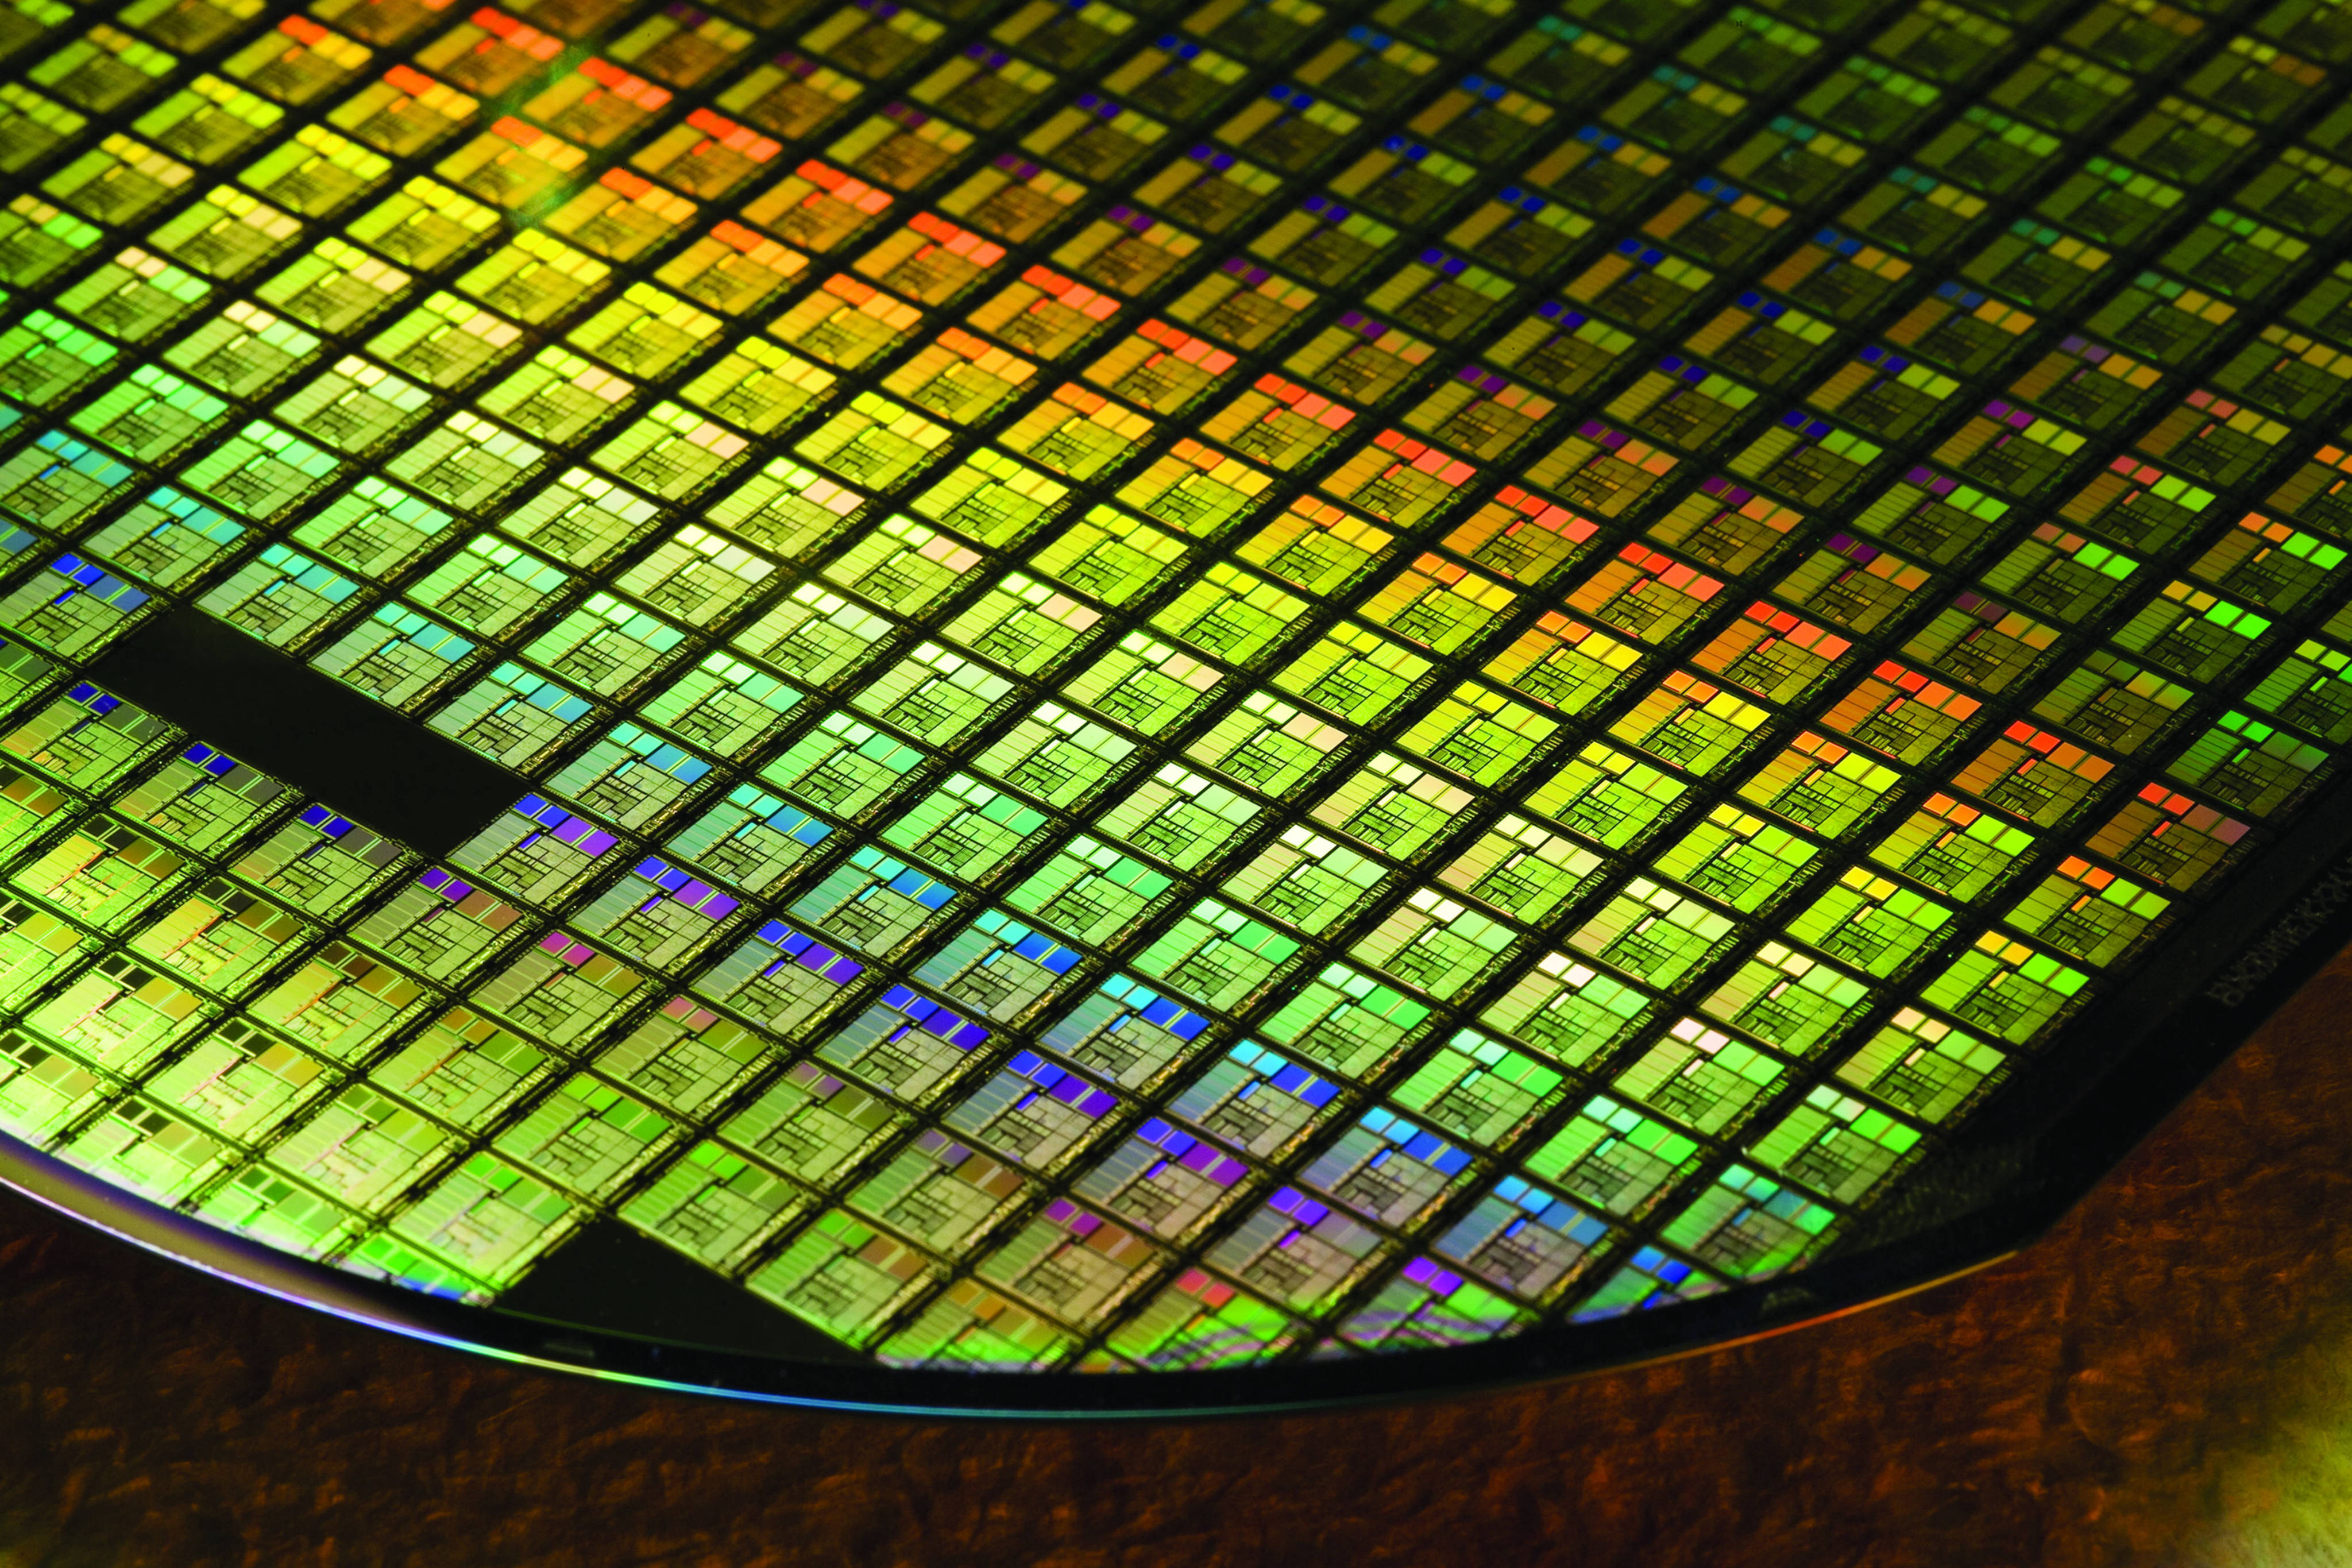 A slice of semiconductor, or wafer, used for making integrated circuit chips. Photo: TSMC